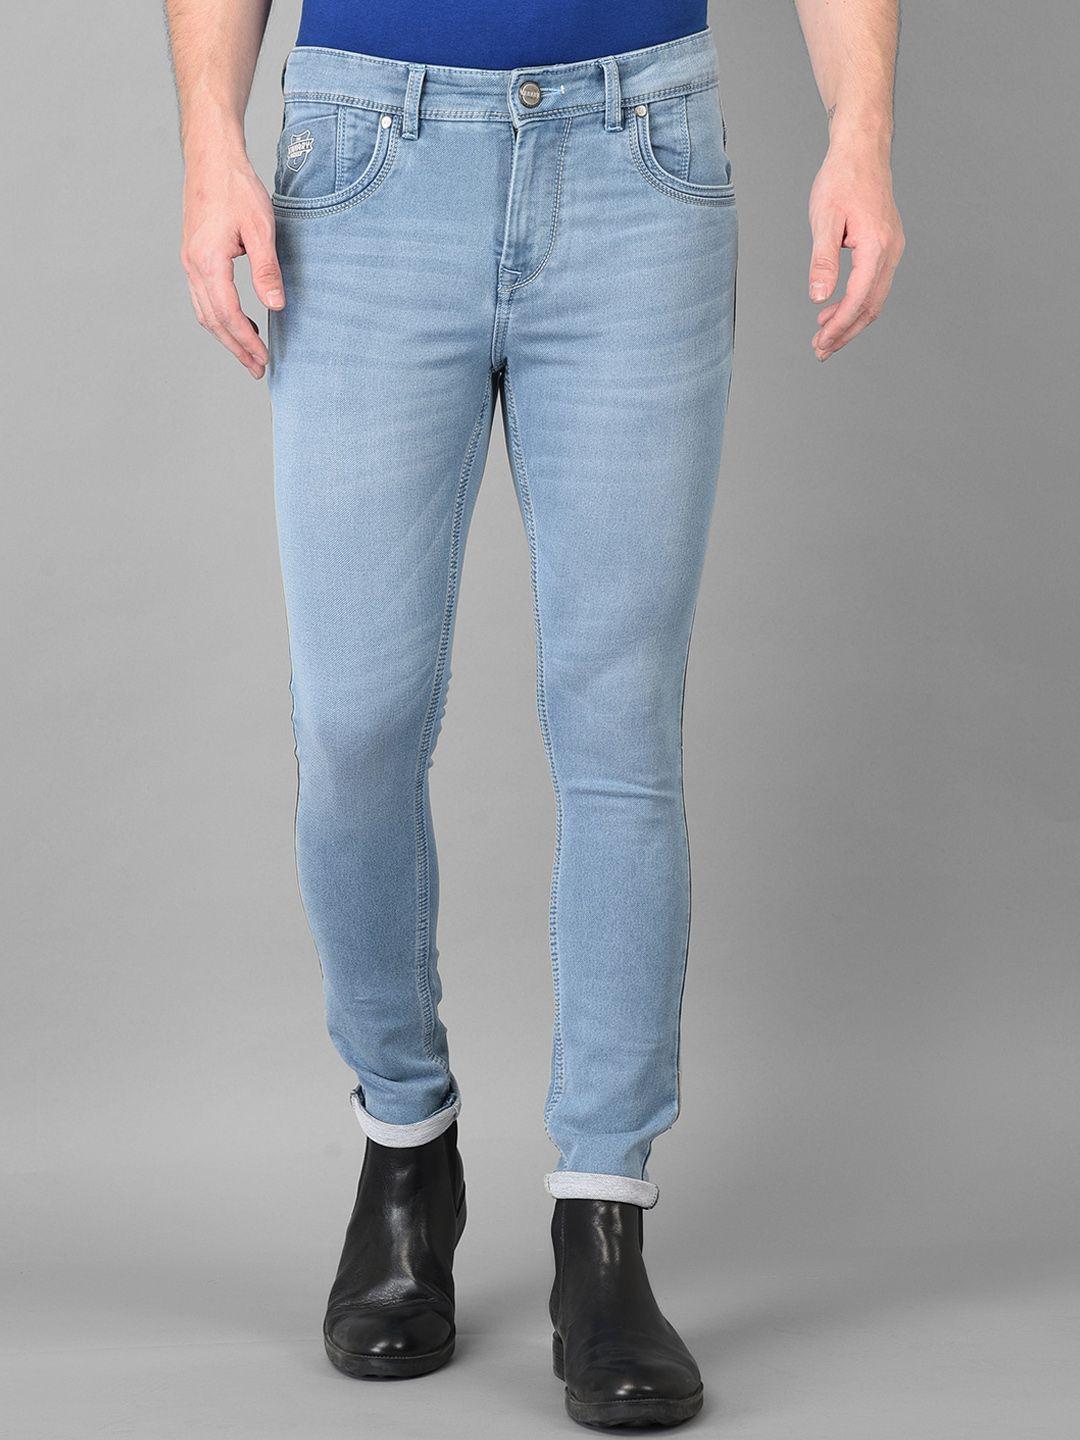 canary-london-men-blue-smart-tapered-fit-low-rise-light-fade-stretchable-jeans